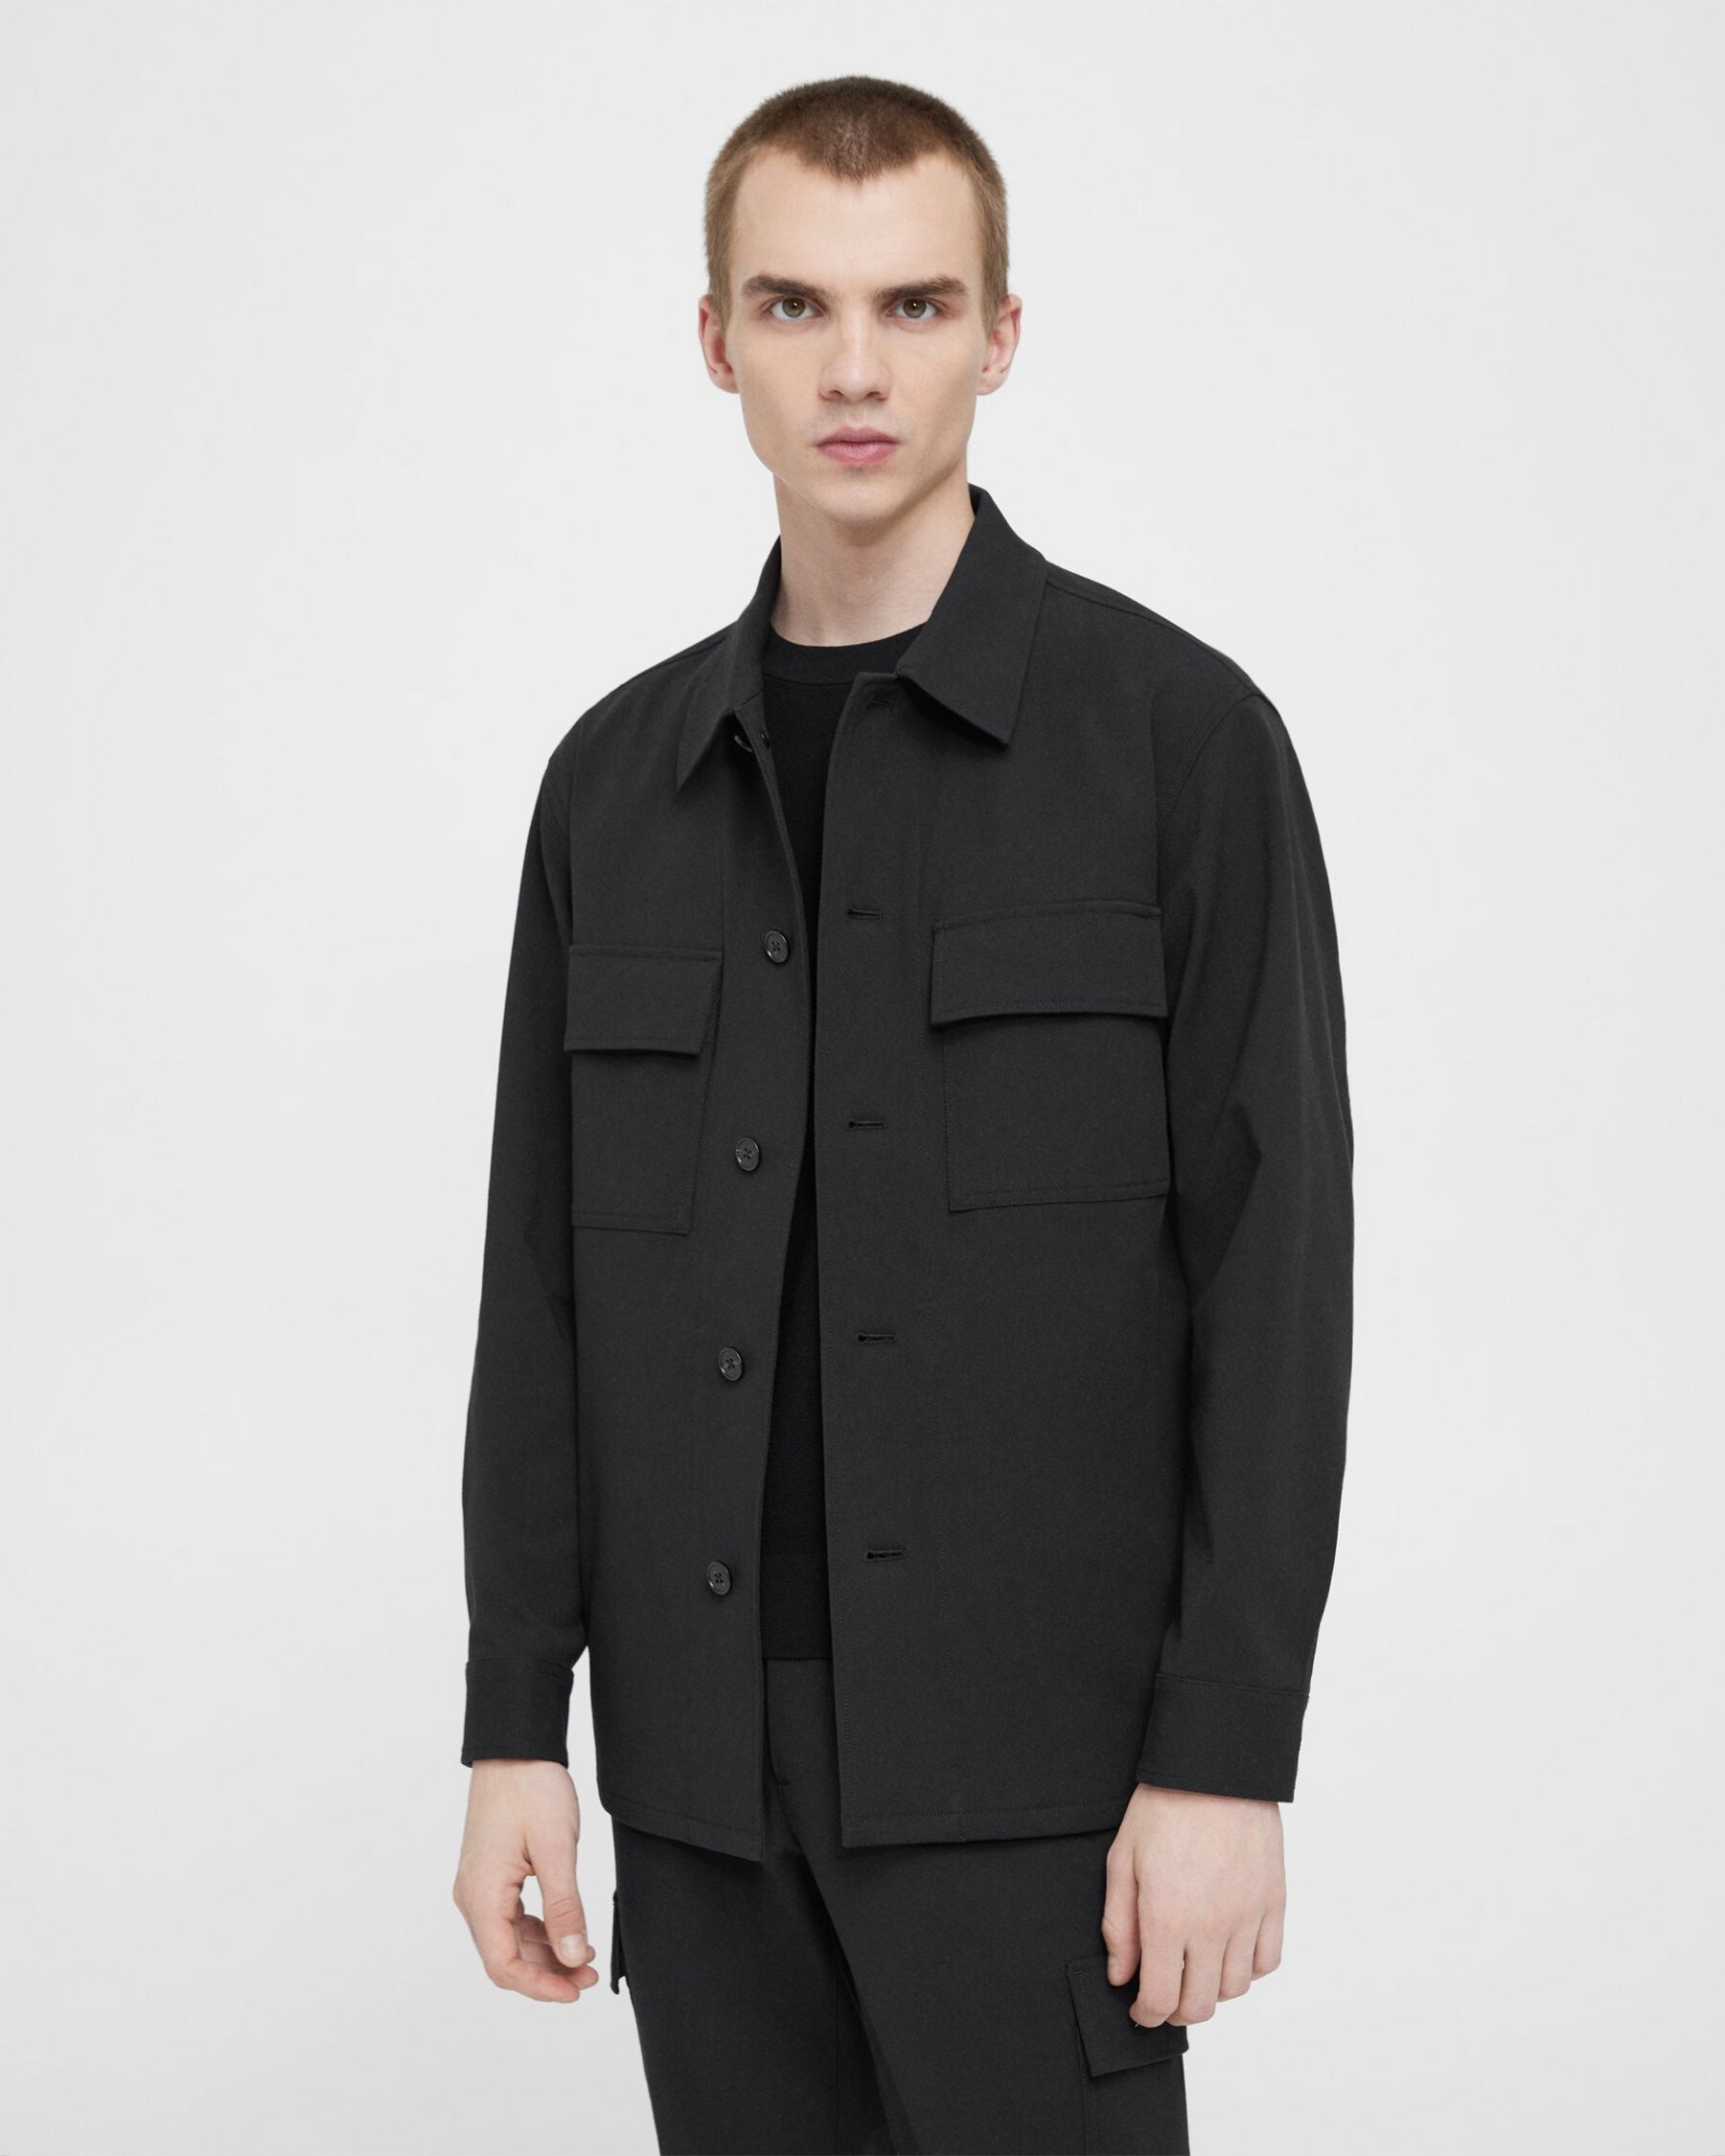 Clyfford Shirt Jacket in Neoteric Twill